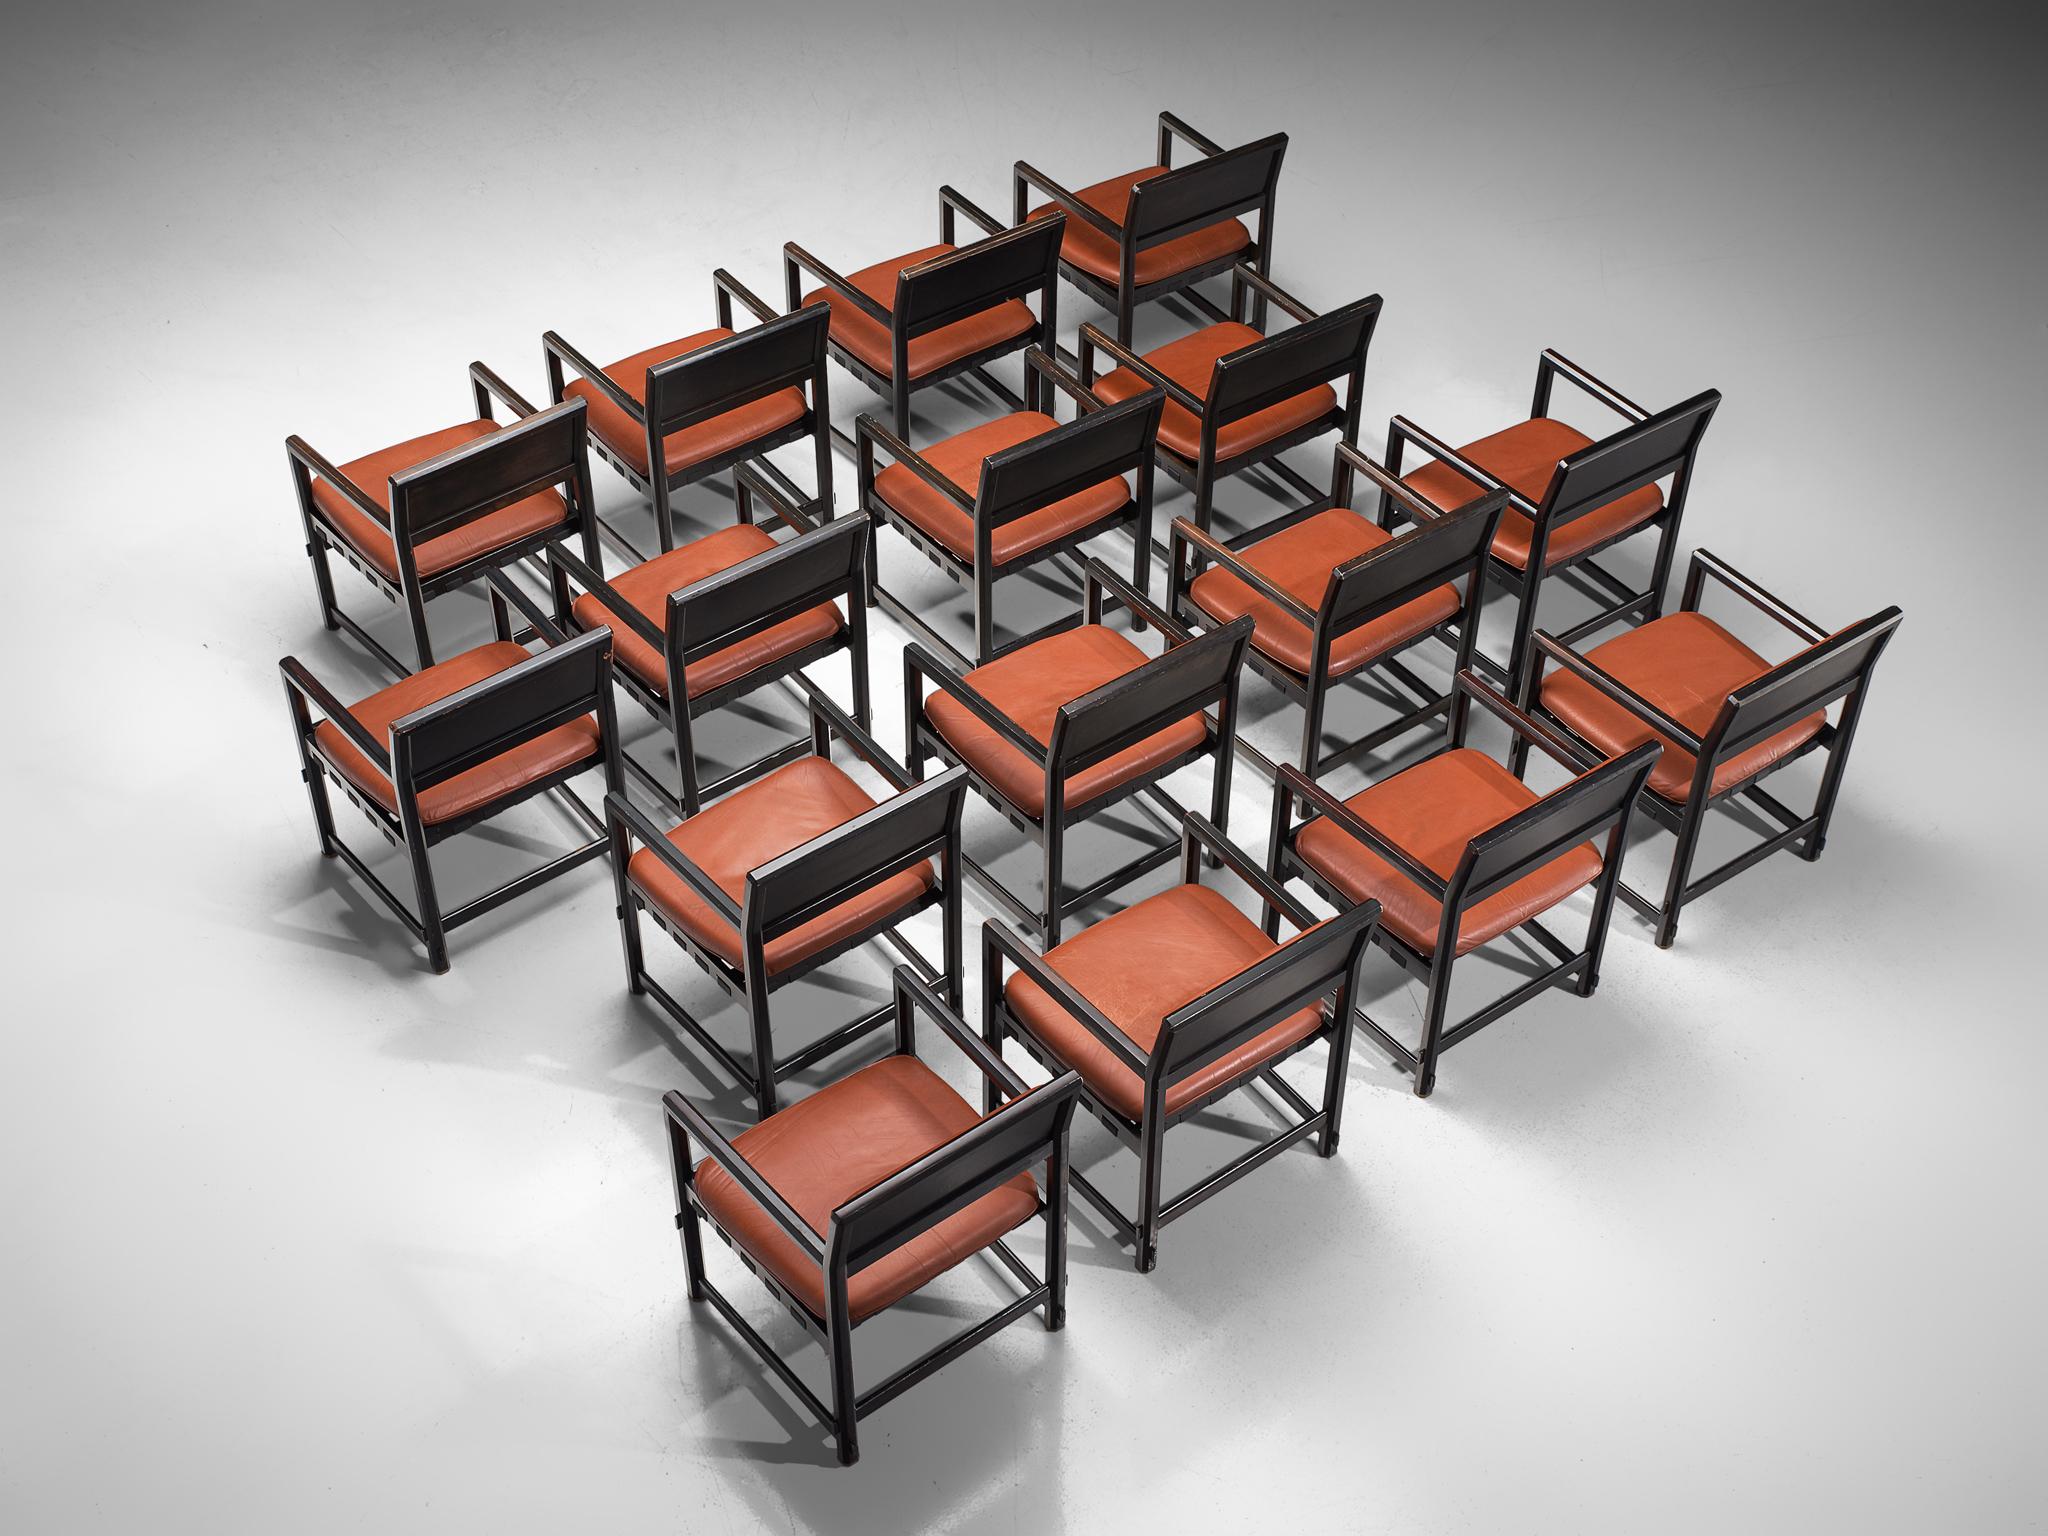 Edward Wormley for Dunbar by Mobilier Universel, set of 16 armchairs model 5762, lacquered black wood, red leather, Belgium, design 1957

This set of 16 grand armchairs by Edward Wormley designed in 1957 consists of a black lacquered frame and a red